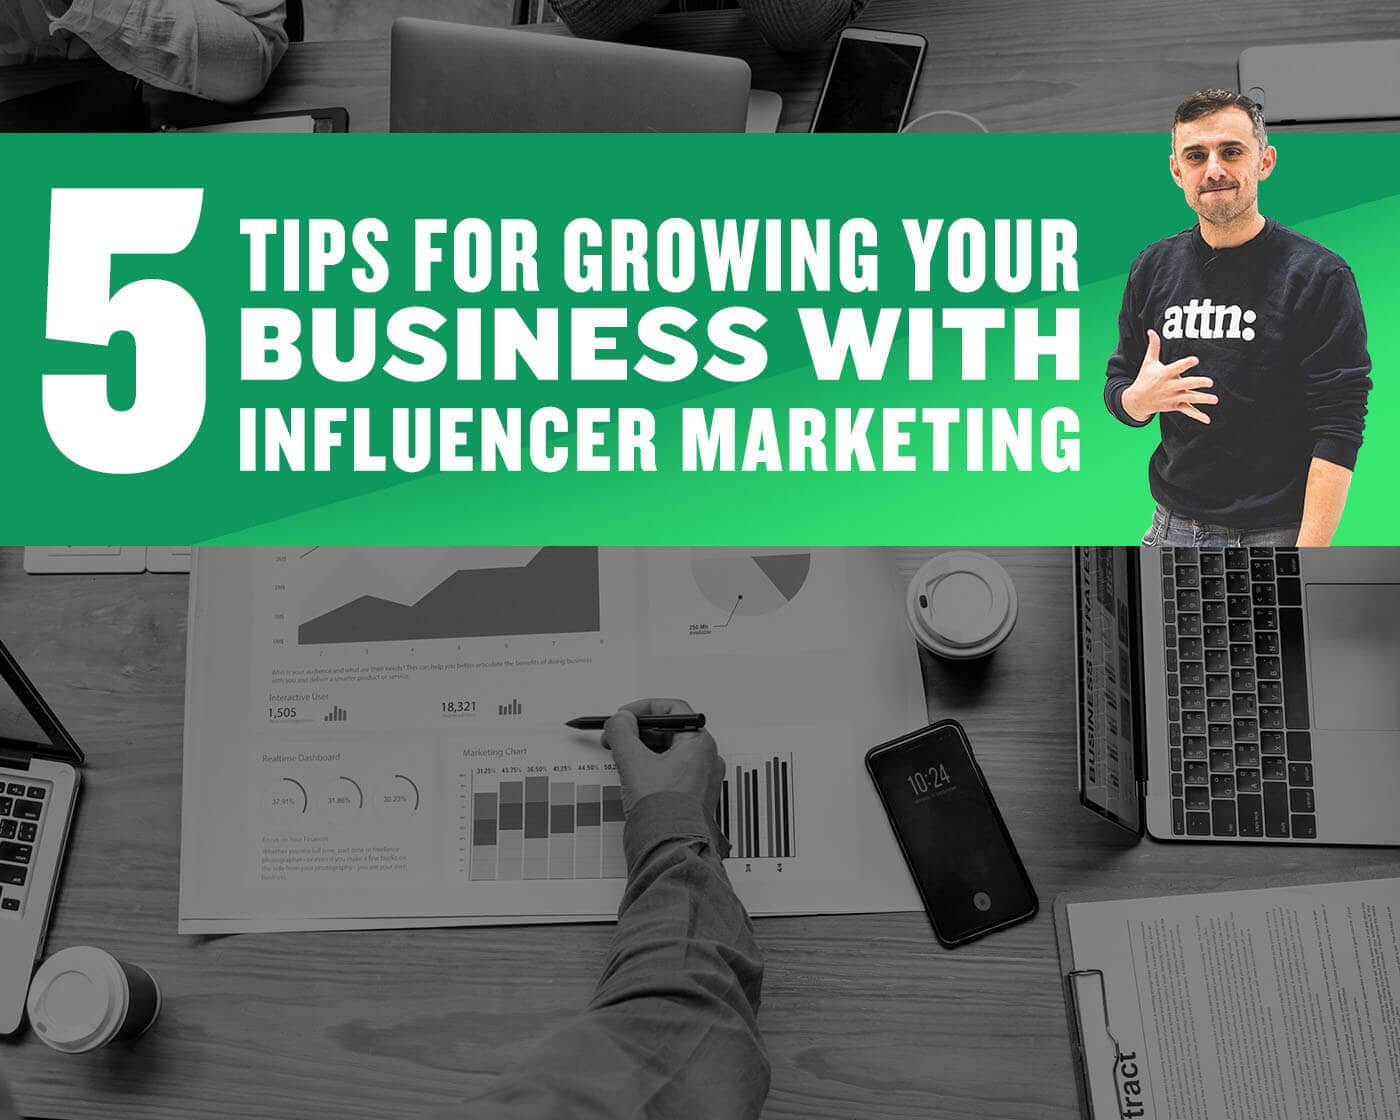 5 Tips for Growing Your Business With Influencer Marketing